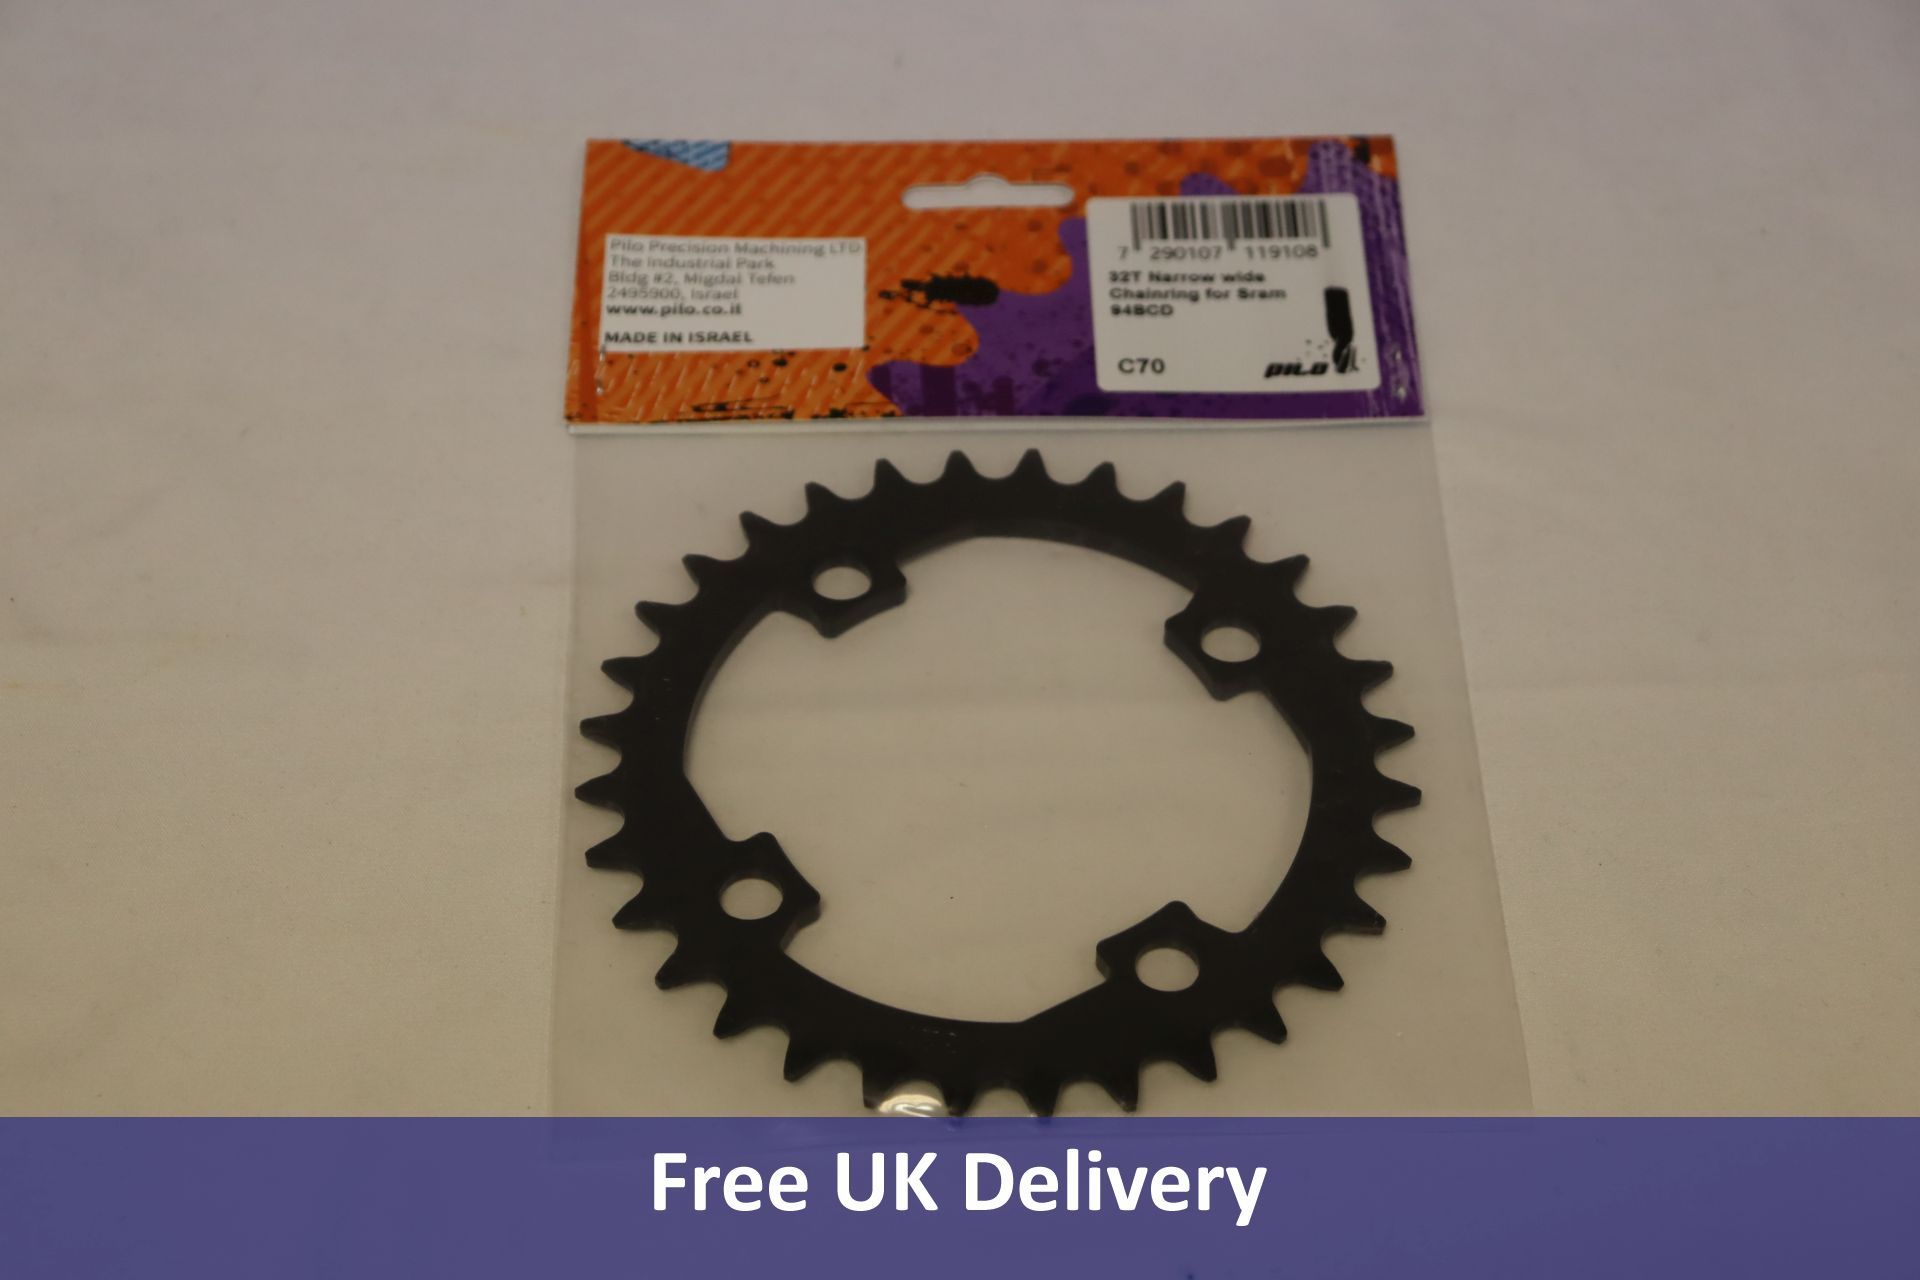 Nine Pilo Narrow Wide Bike Chainrings to include 2x 36T for 104BCD, 4x 32T for 104BCD, 3x 32T for Sr